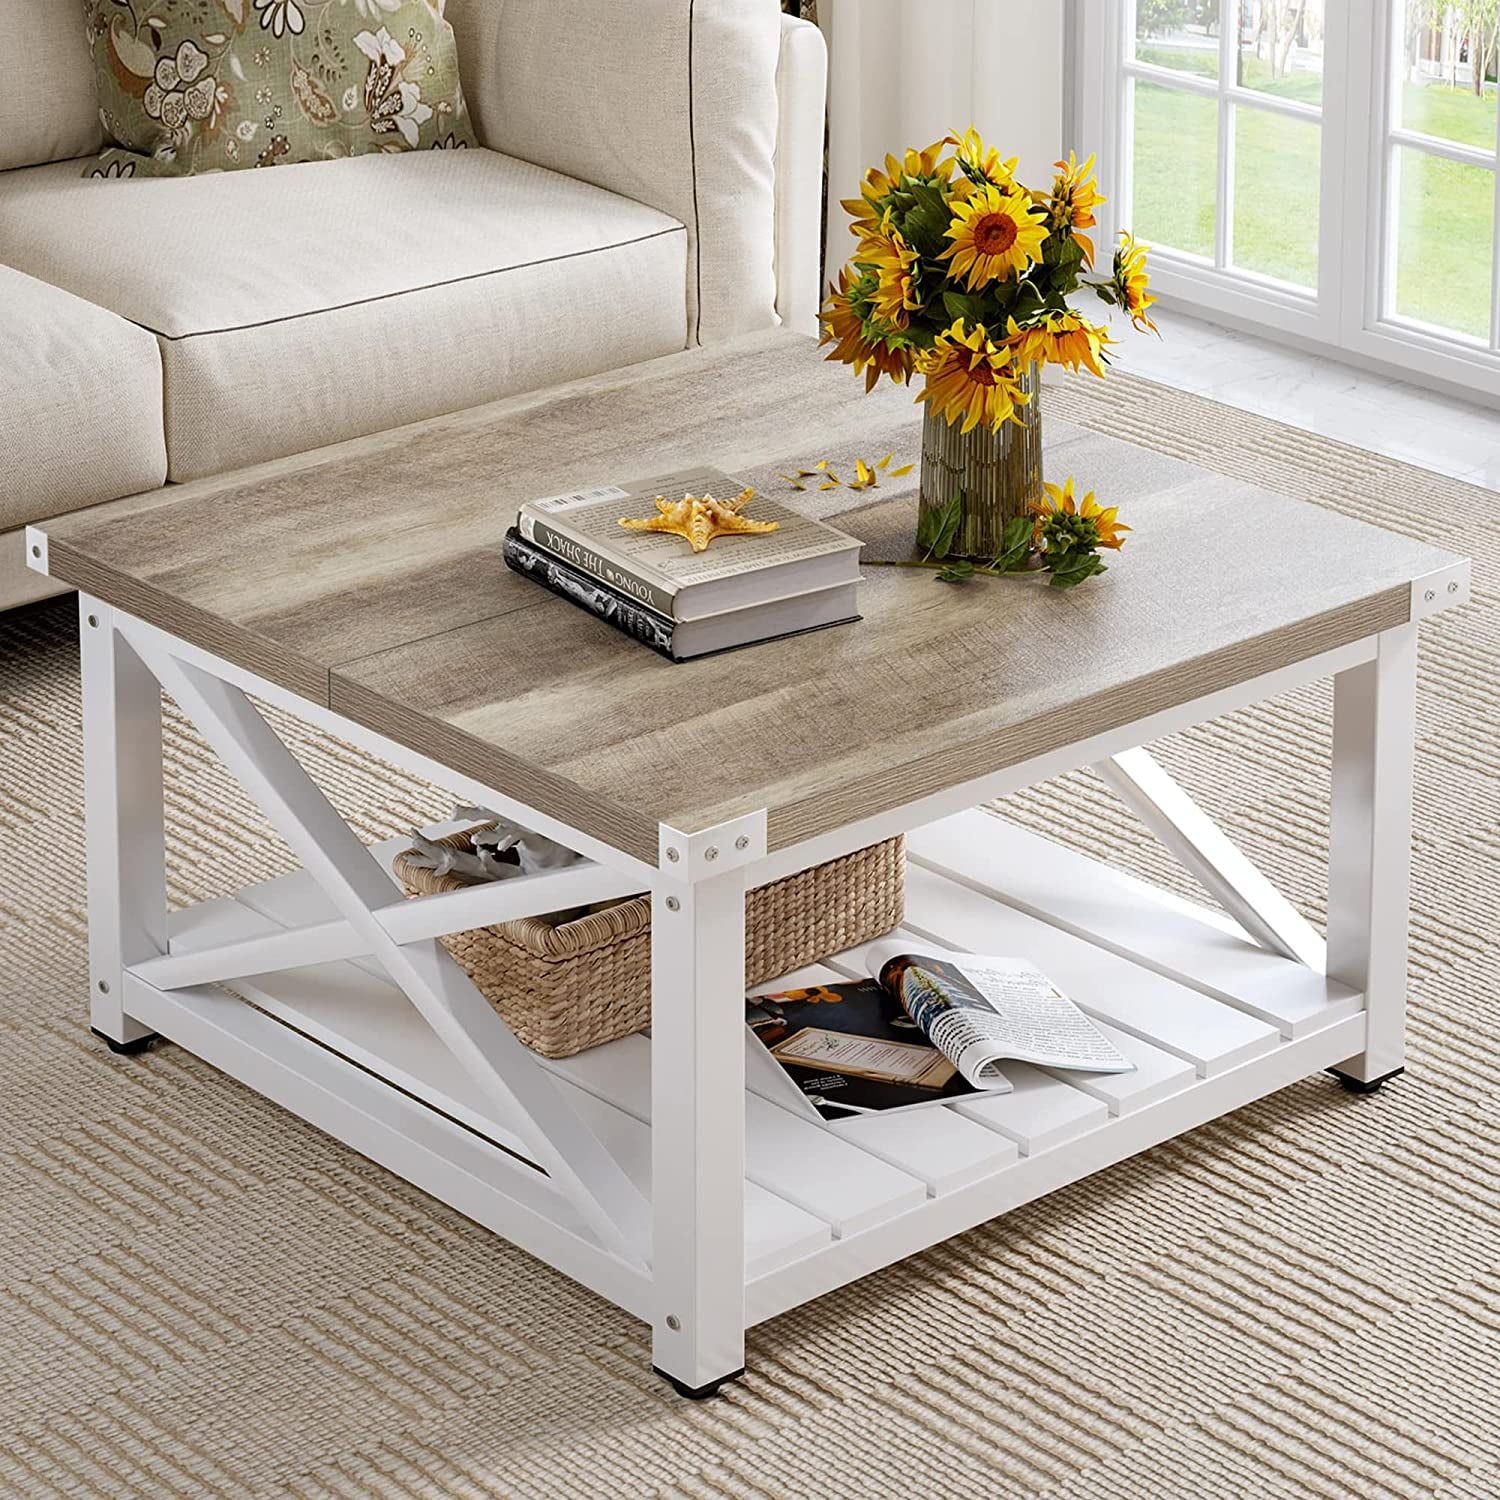 Dextrus Farmhouse Coffee Table For Living Room, Square Wood Coffee Table  With Open Storage Shelf – Walmart In Living Room Farmhouse Coffee Tables (View 5 of 15)